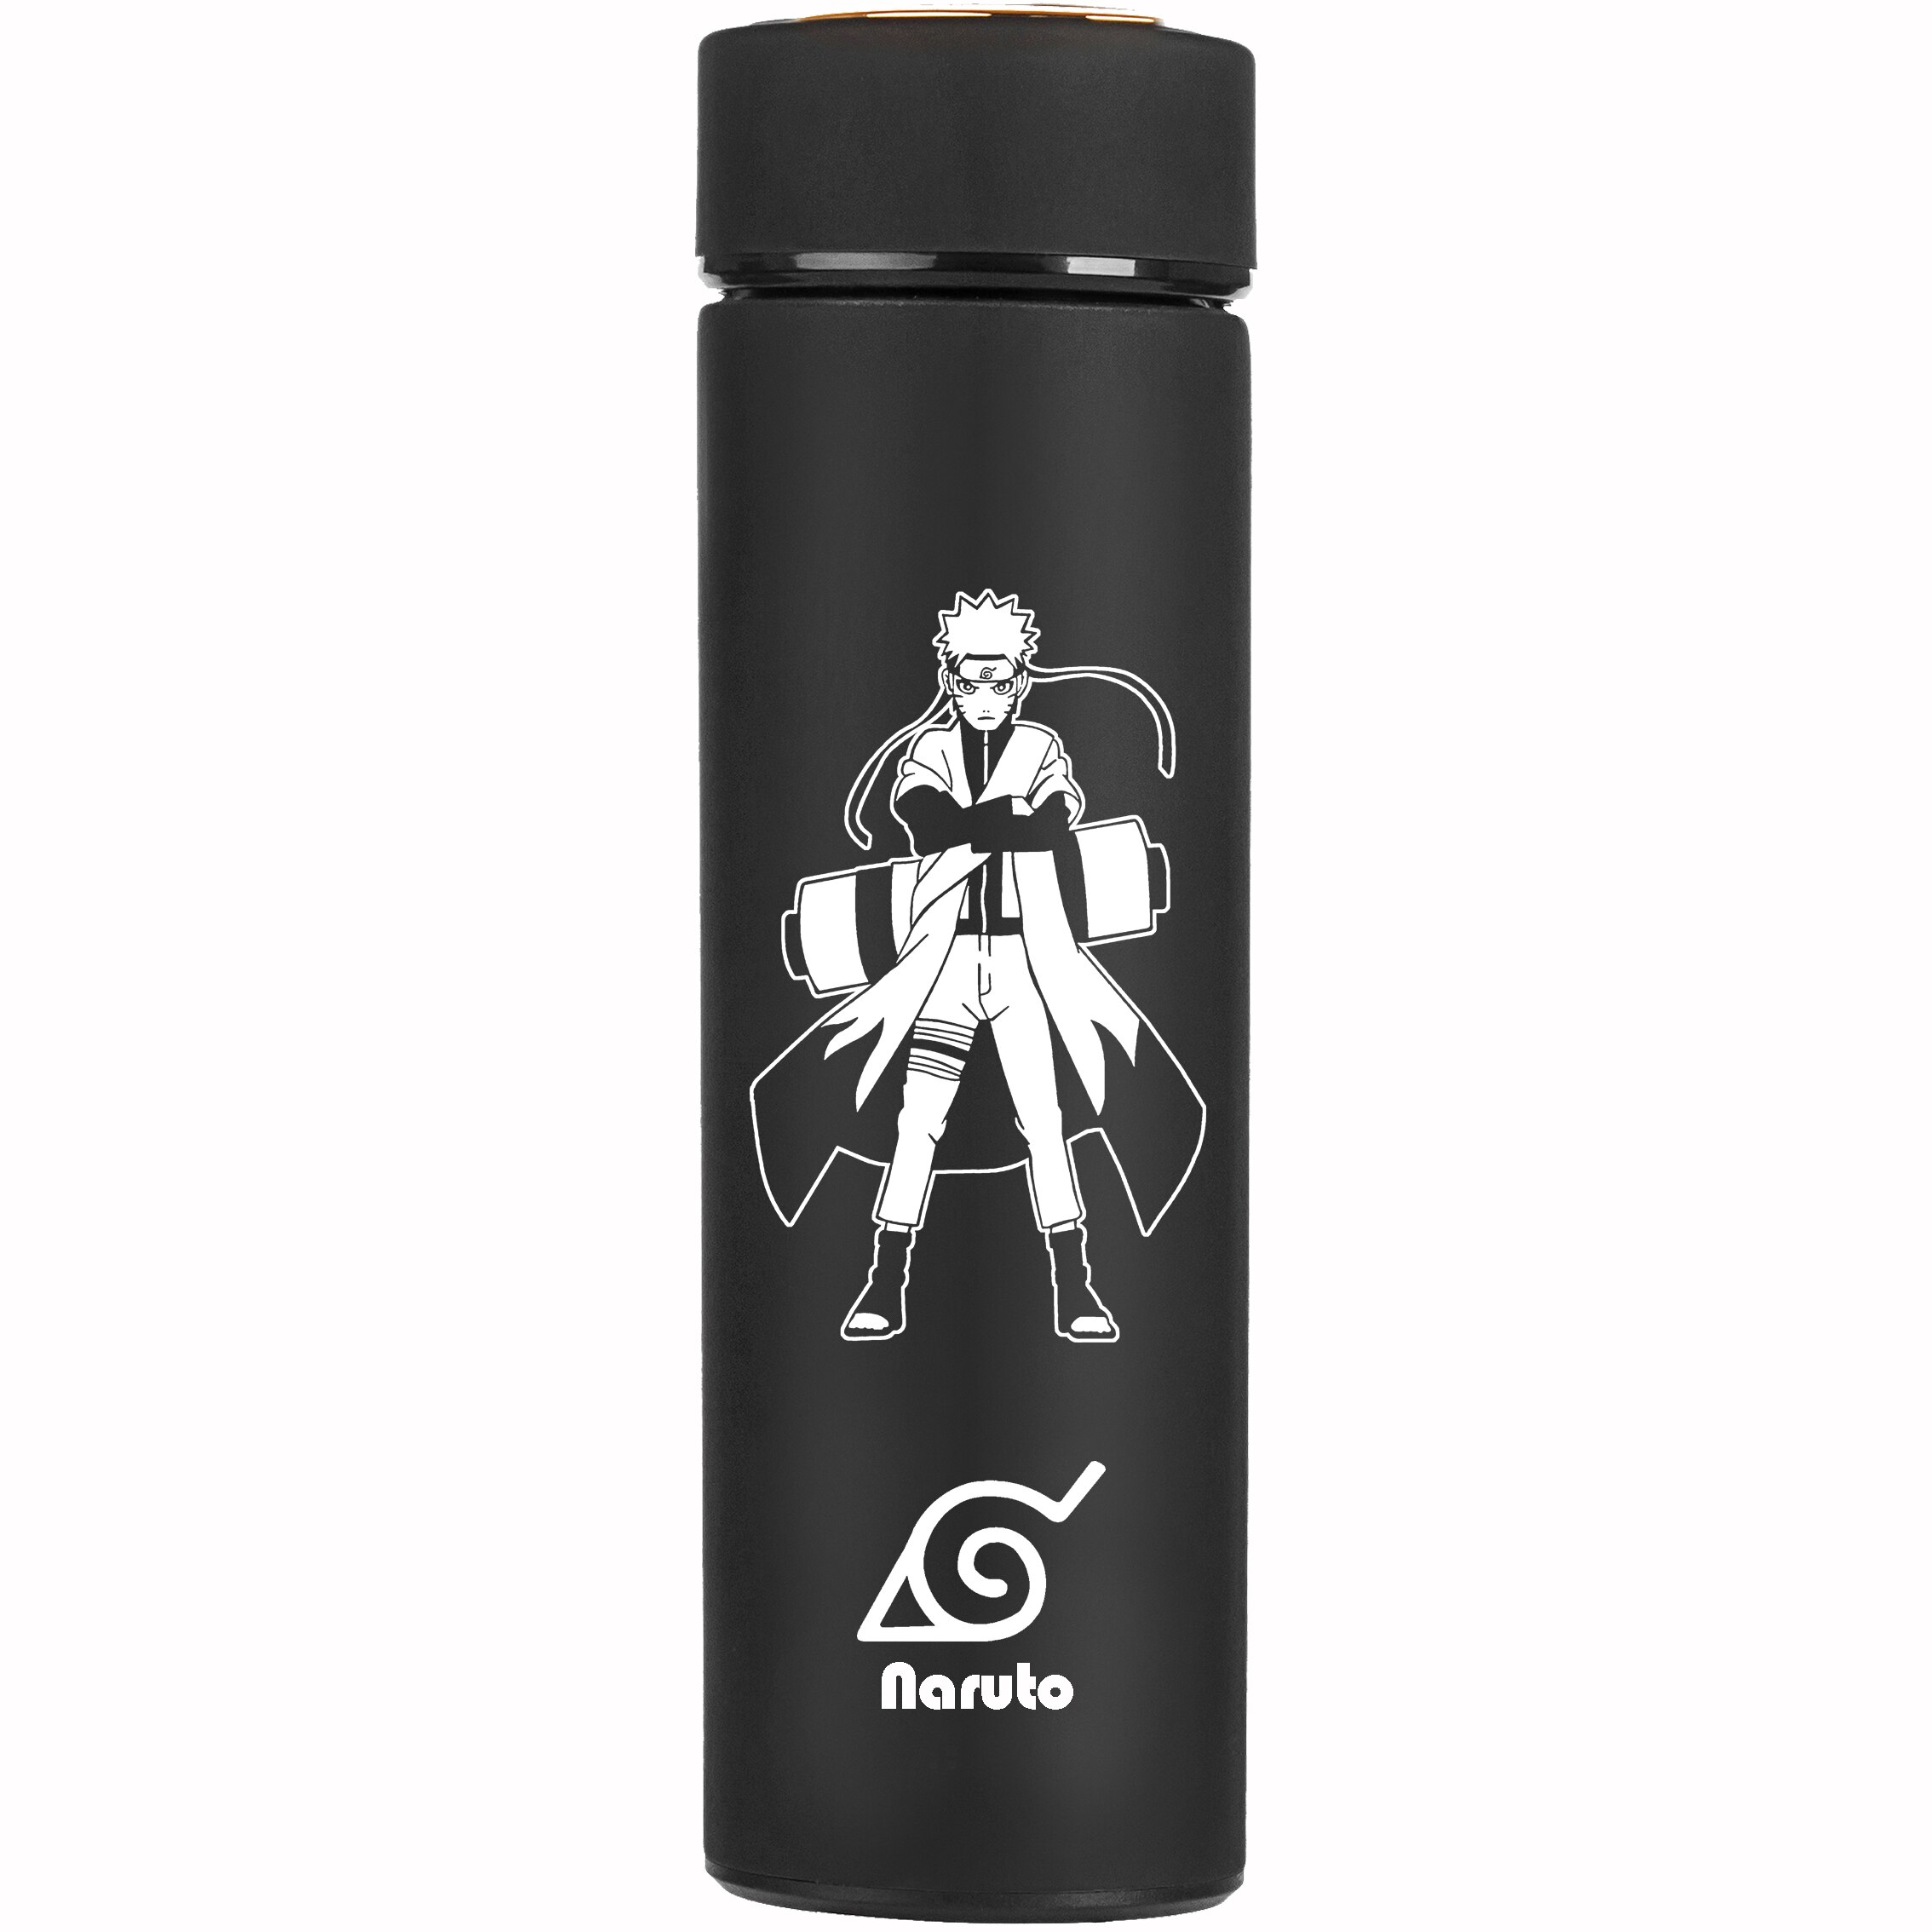 Naruto – All Characters Black and White Aesthetic Water Bottles (25+ Designs) Mugs